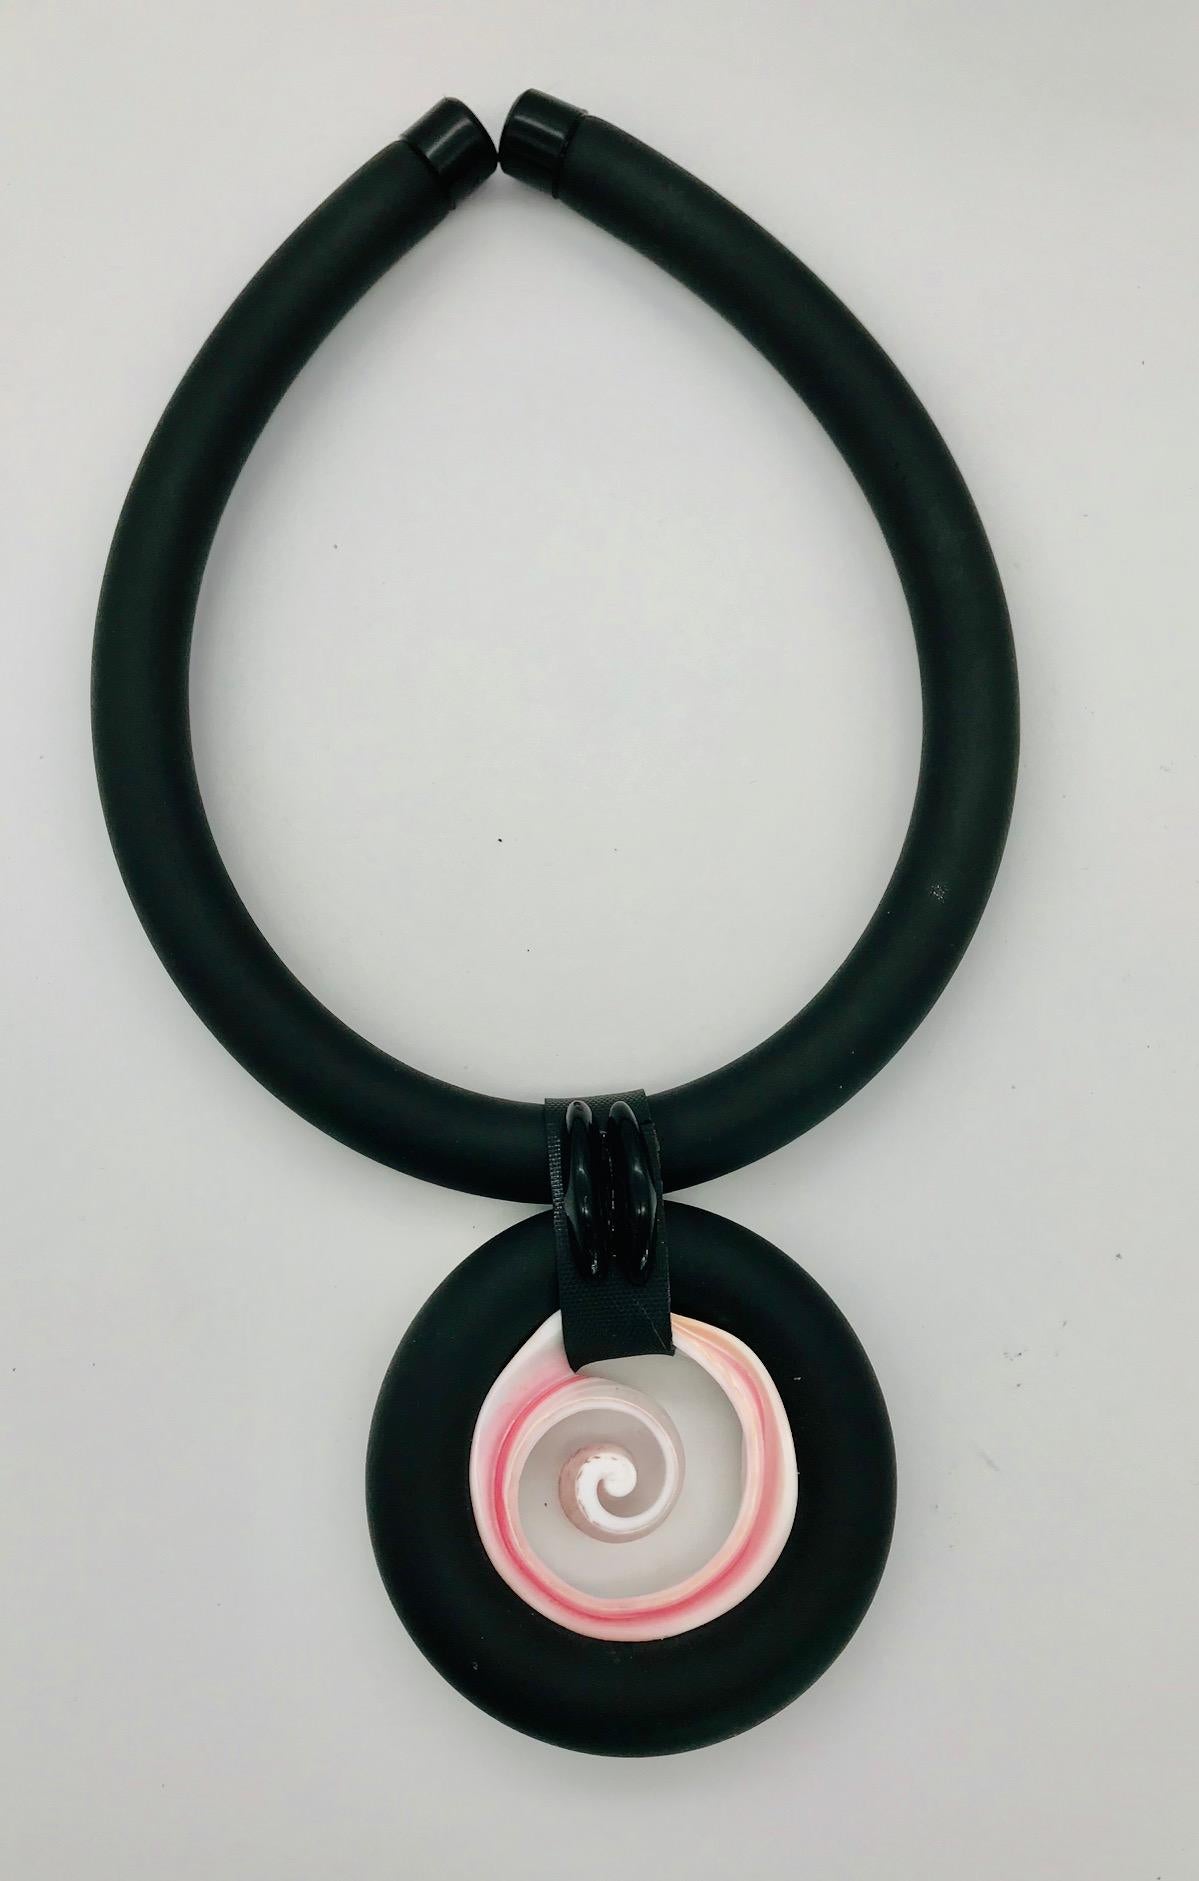 
This Necklace/Choker is made from porcelain like pink color  Conch which is eco –luxe, and eco -friendly. The pink Conch is a shell from Caribbean Sea it is harvested wild and as a by-product of sustainable food aquaculture. The Conch shell is the